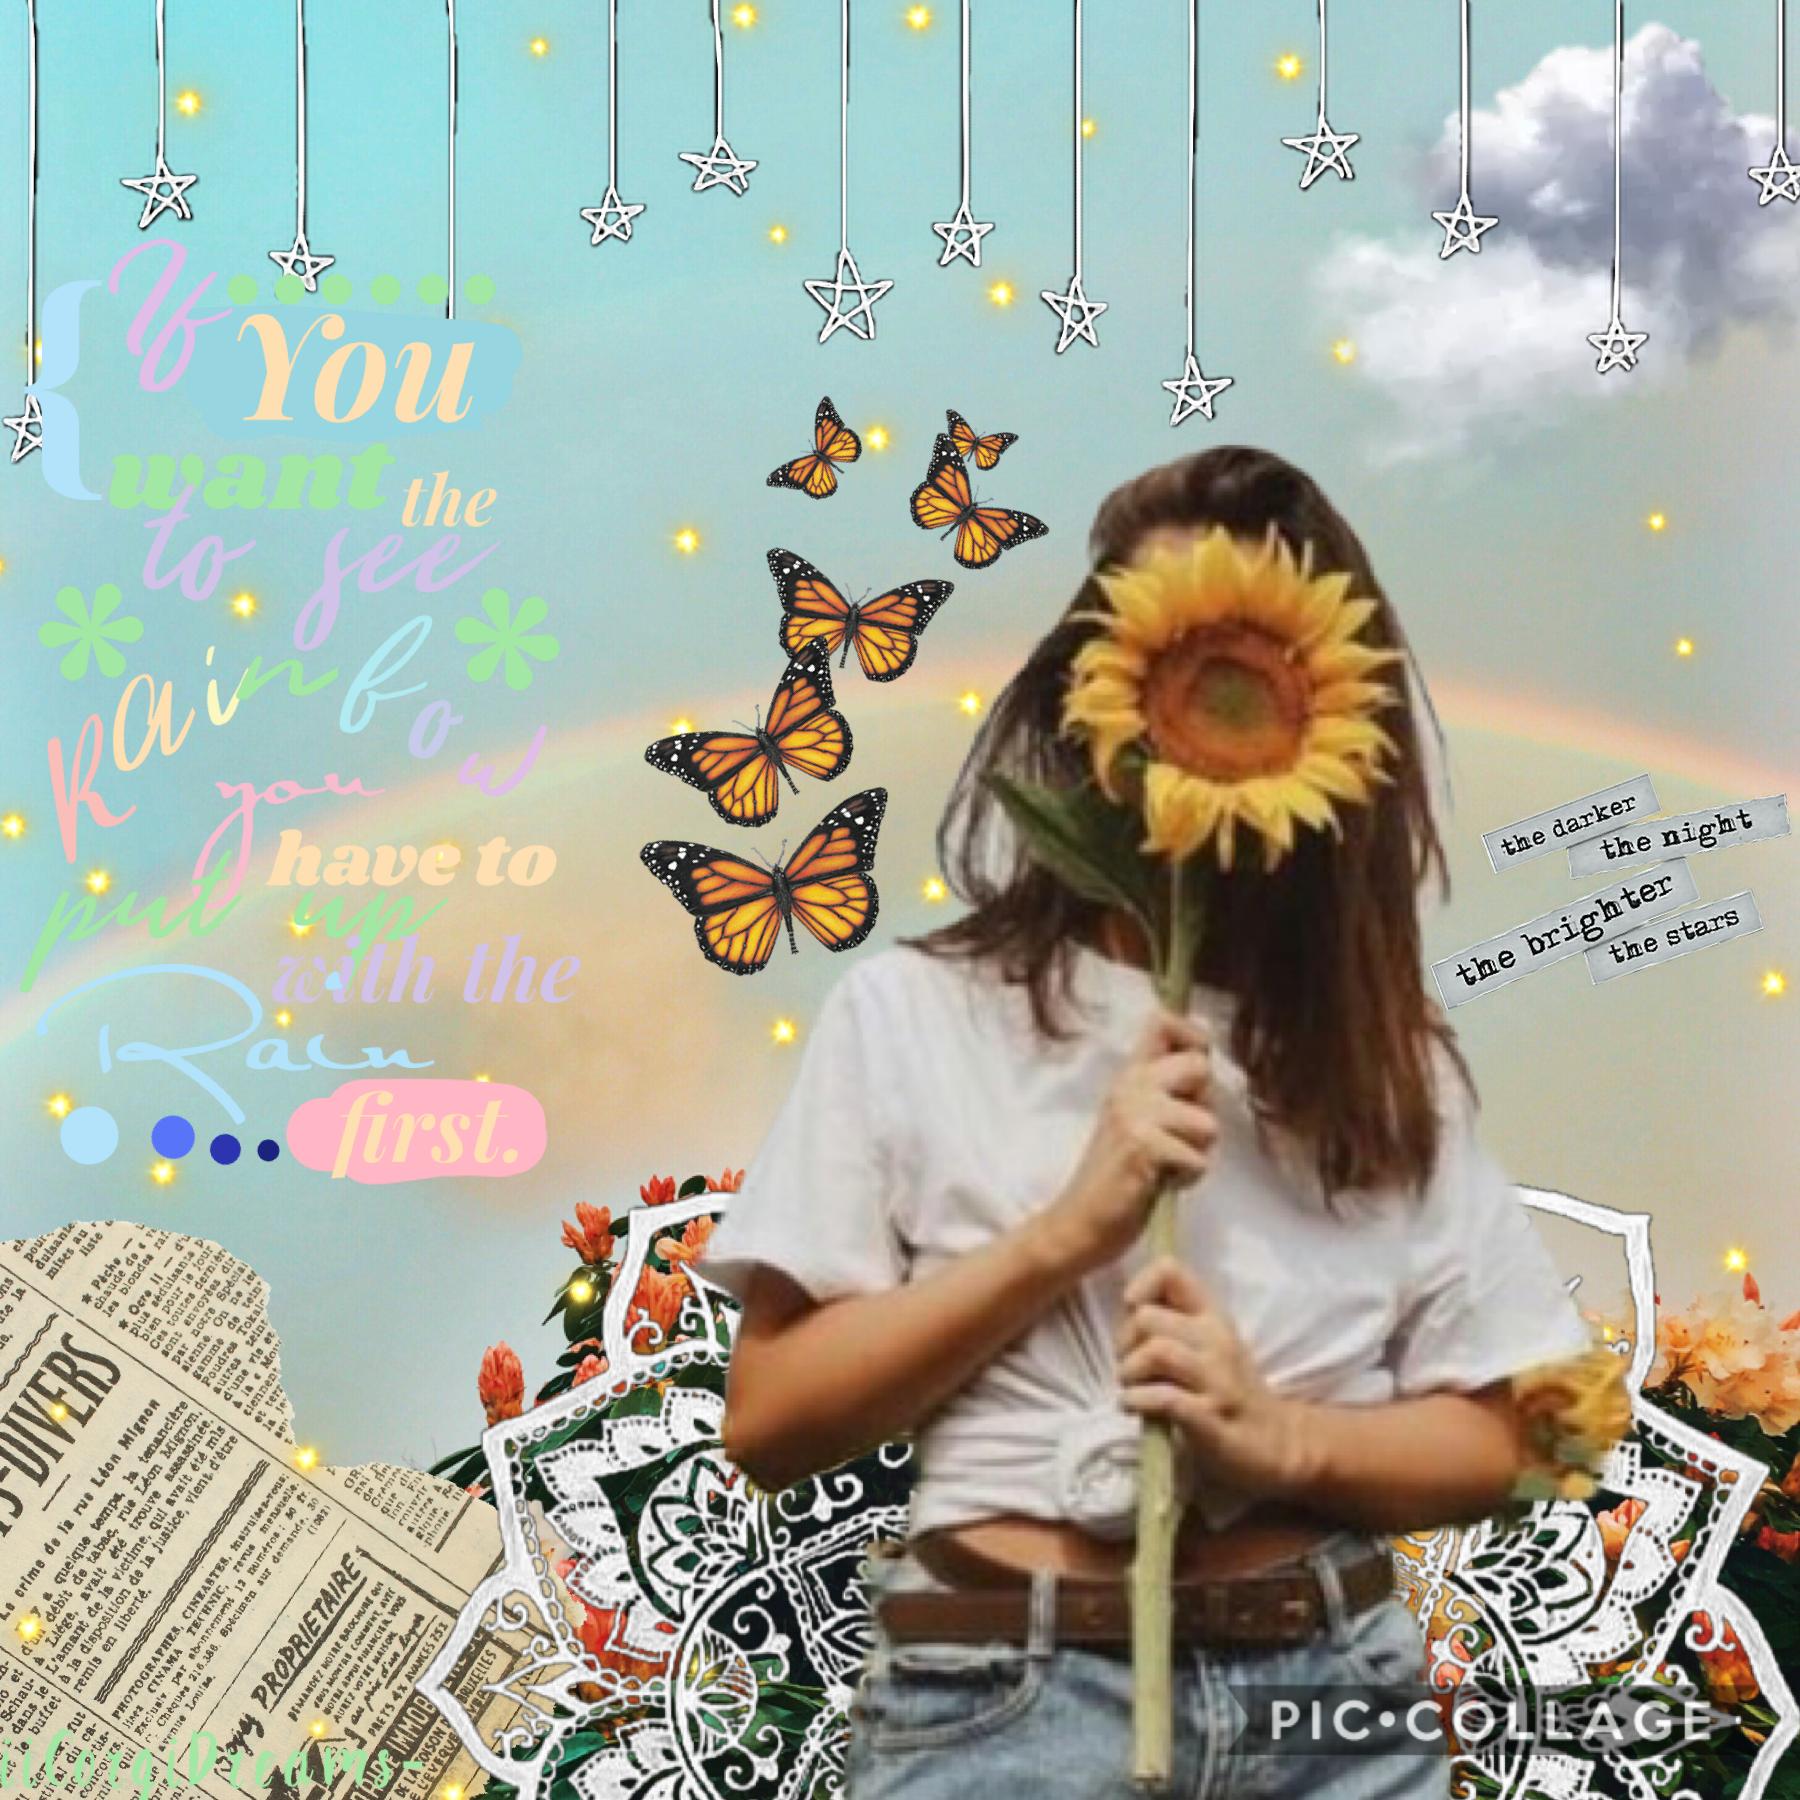 🌹Tap🌹
QOTC: Favorite type of flower?
AOTC: Lavender! 
I hope you guys like this! I’m in a collaging sort of mood today. ✨
Shoutout to countingstars- (Camila) because maybe if I’m nice to her she’ll give me Mickey :) 